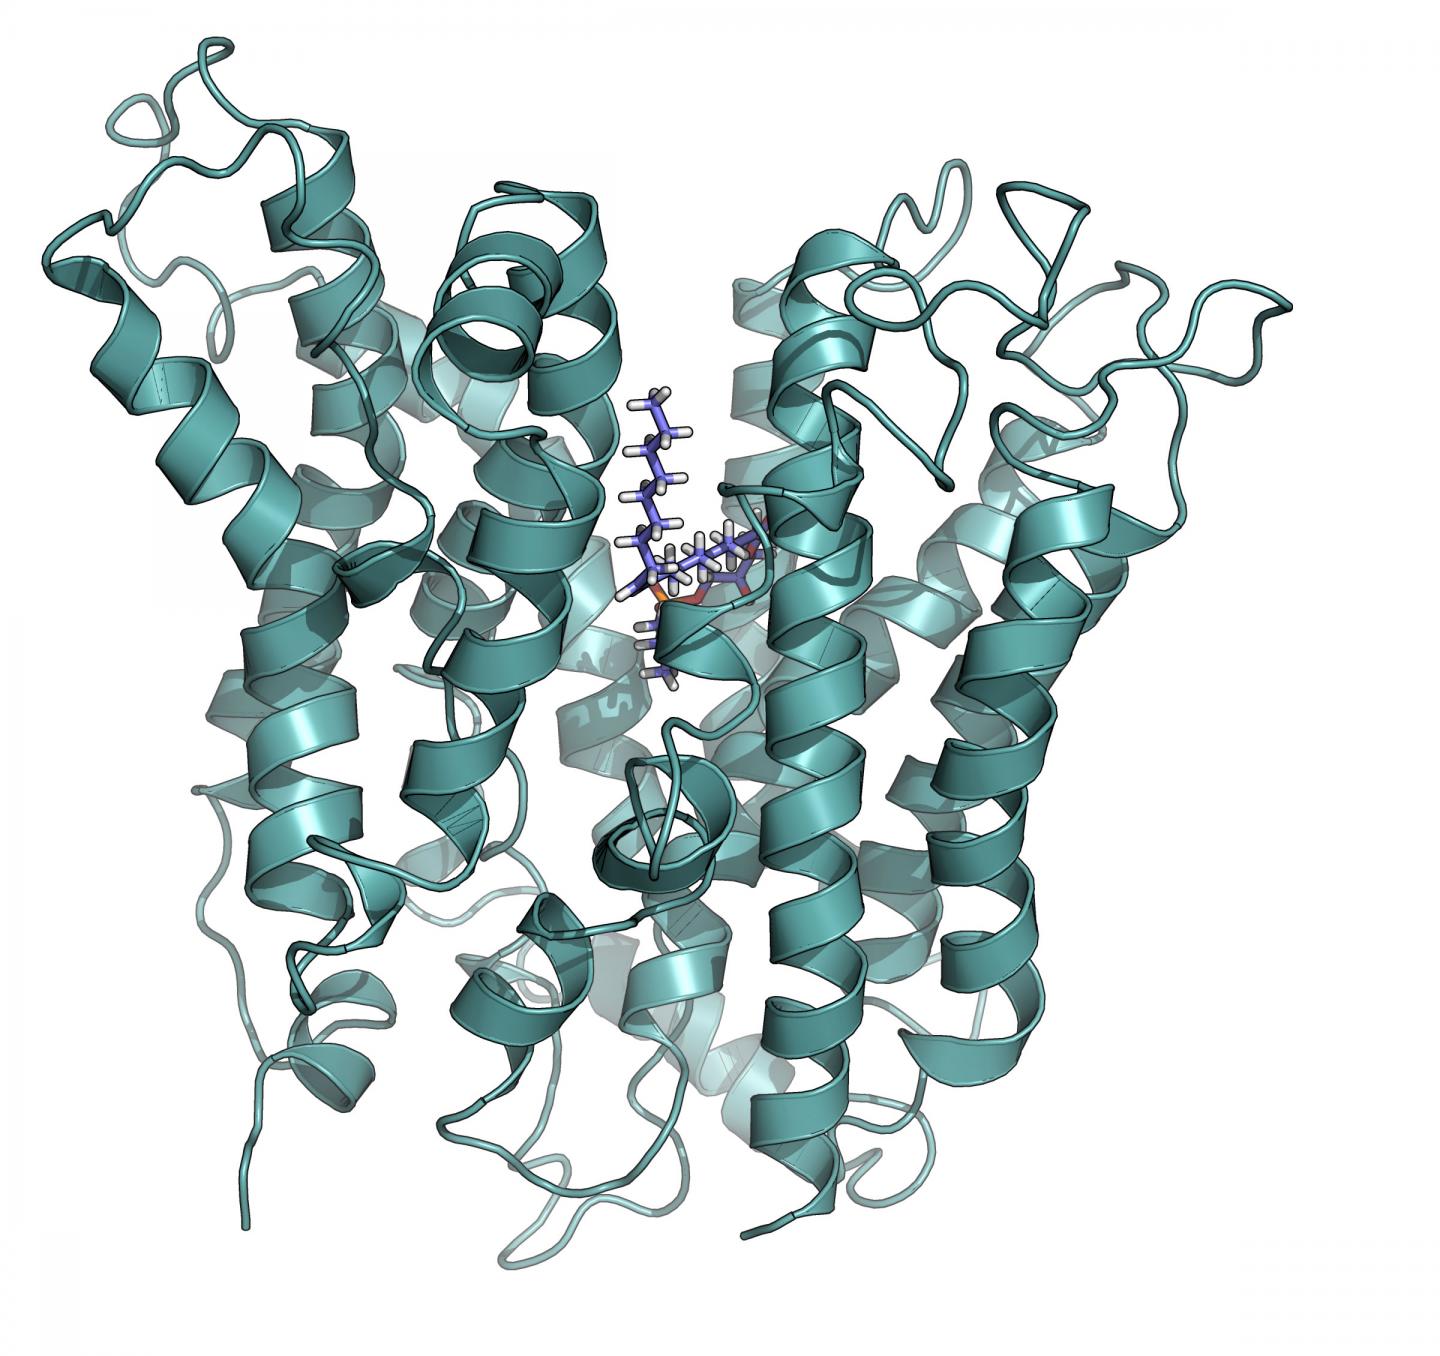 This image shows the structural model of critical transporter, Mfsd2a. Source: Duke-NUS Medical School